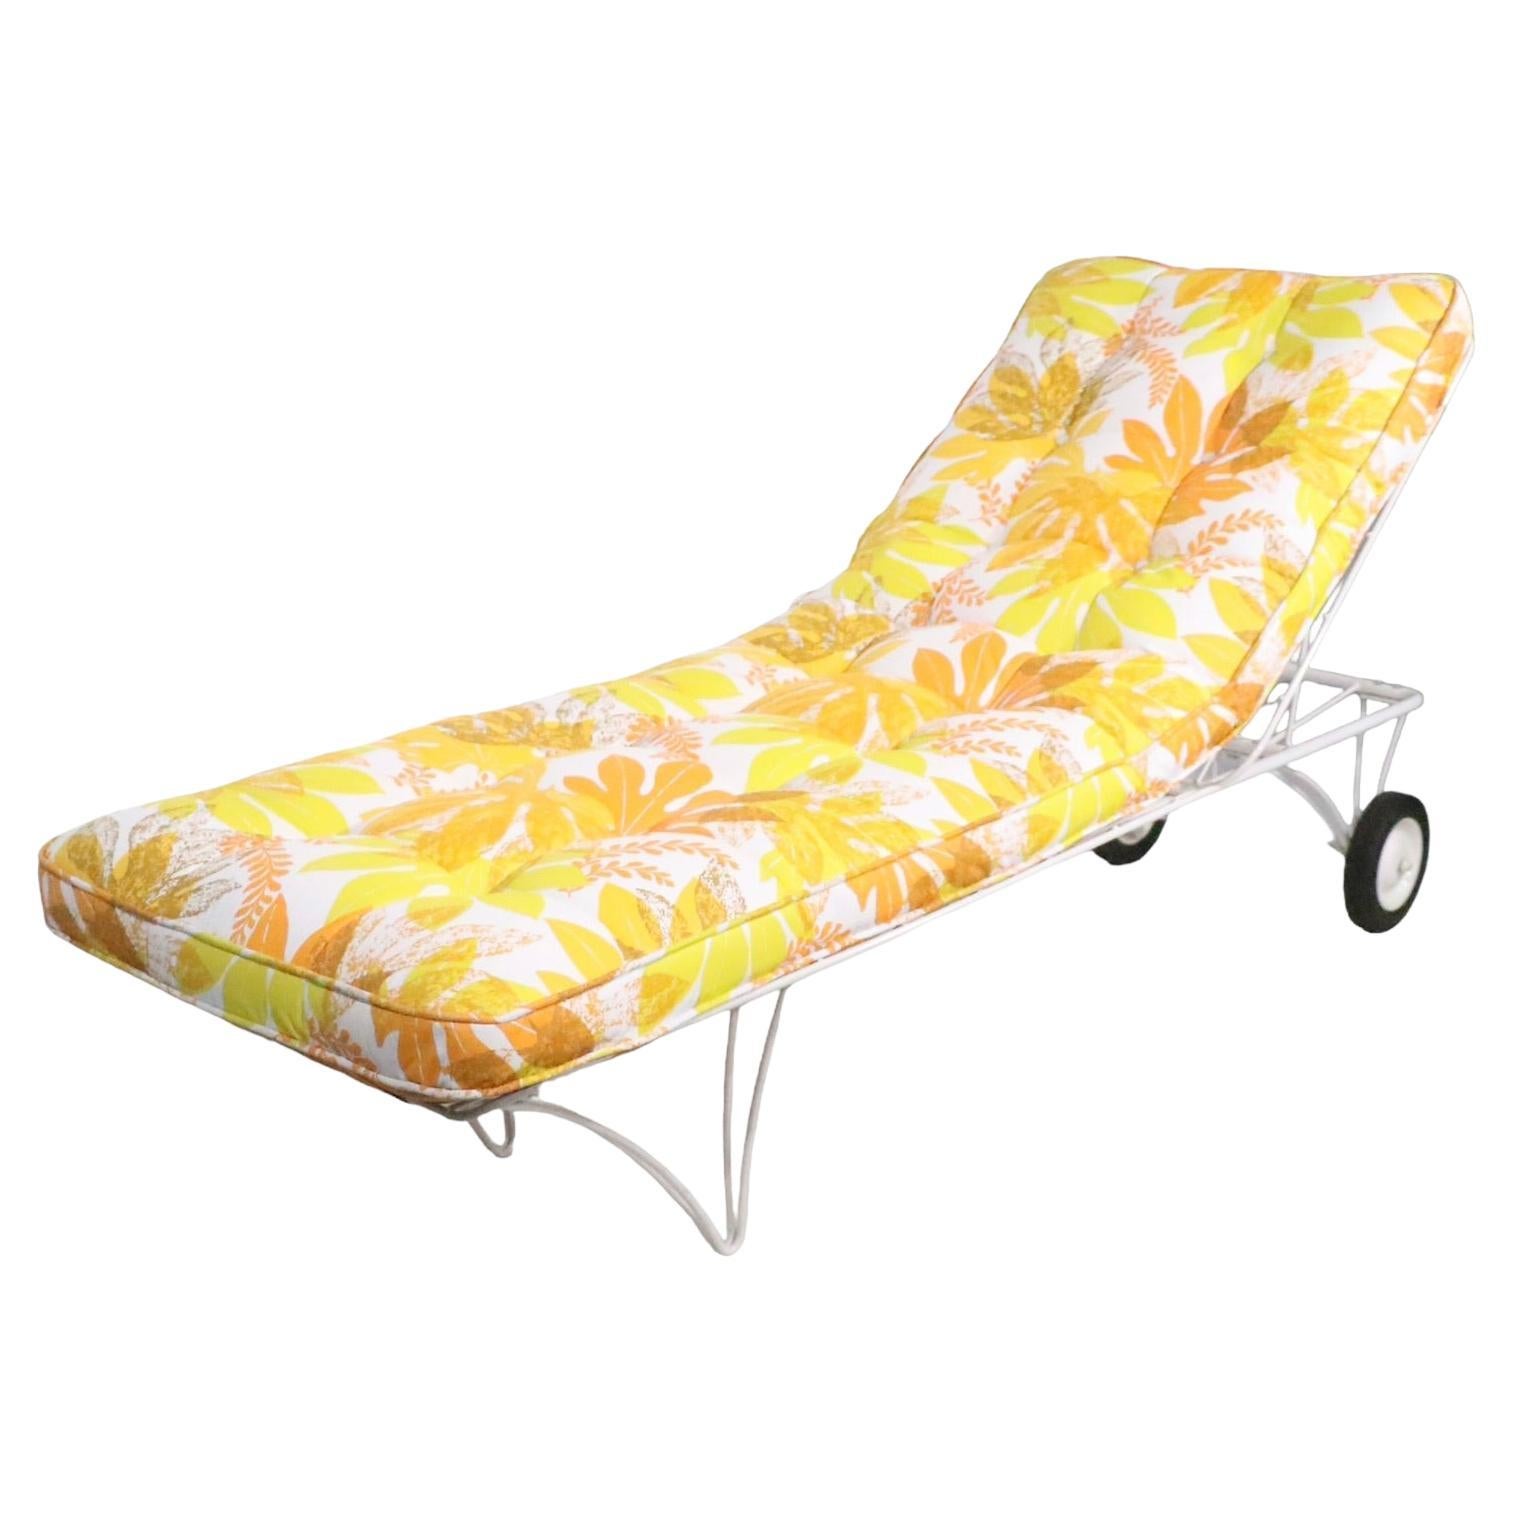 Reclining Daybed Poolside Garden Patio Chaise Lounge by Homecrest C 1950/1960s